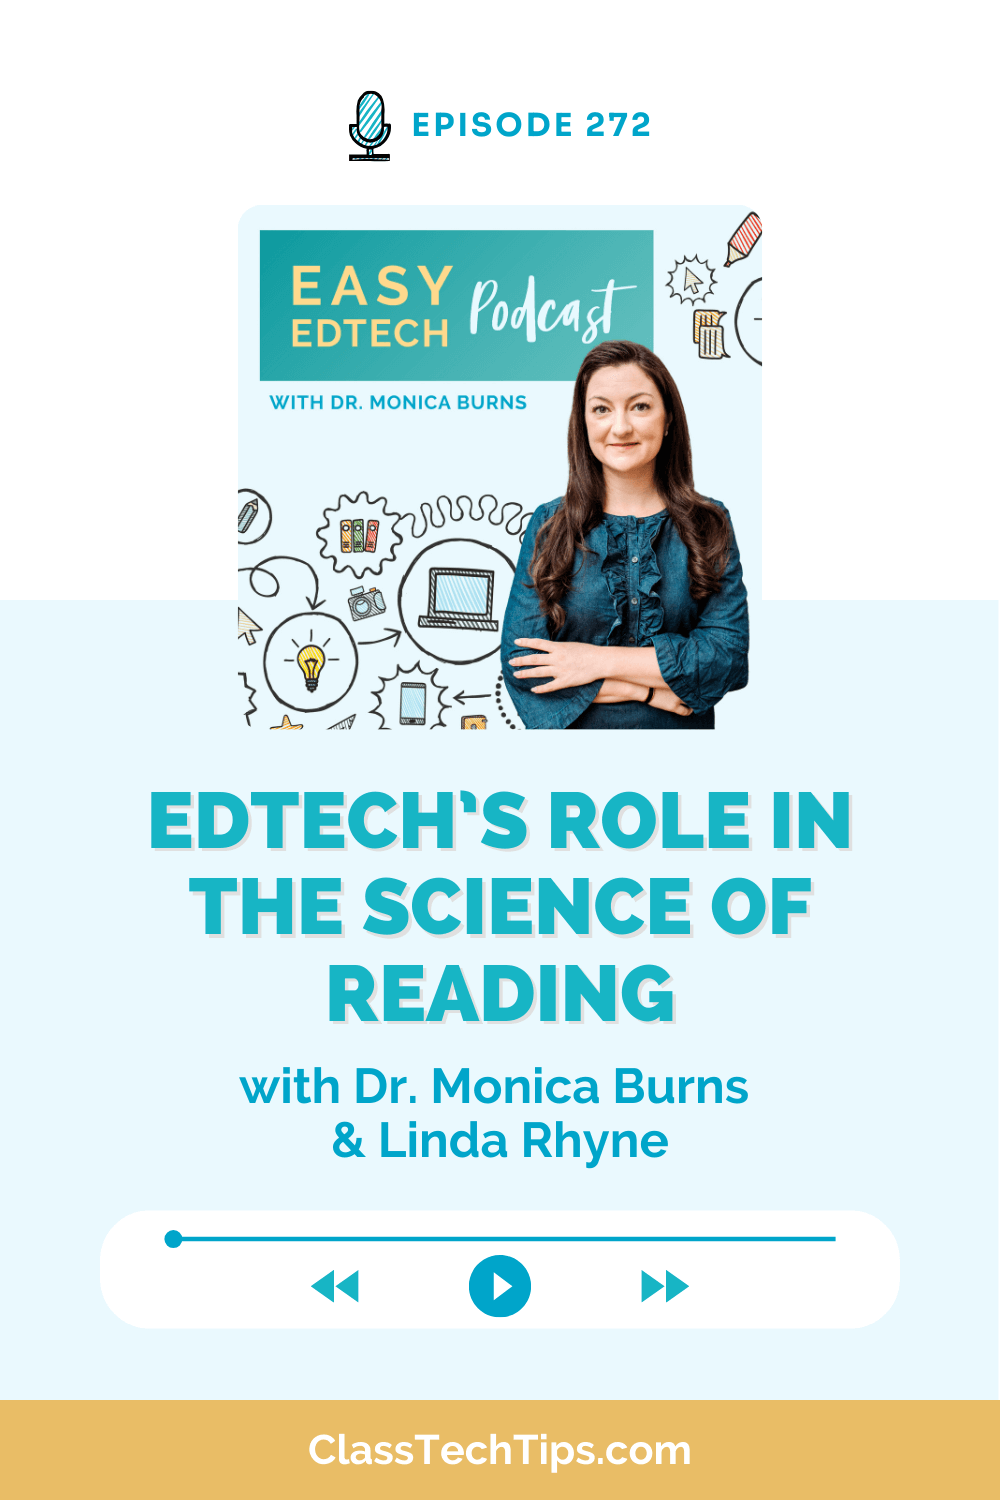 Discover how EdTech supports the Science of Reading and cross-curricular learning in Episode 272 of the Easy EdTech Podcast. Dr. Monica Burns and Linda Rhyne discuss leveraging technology, including AI, for student literacy. The image shows Dr. Monica Burns with podcast graphics.